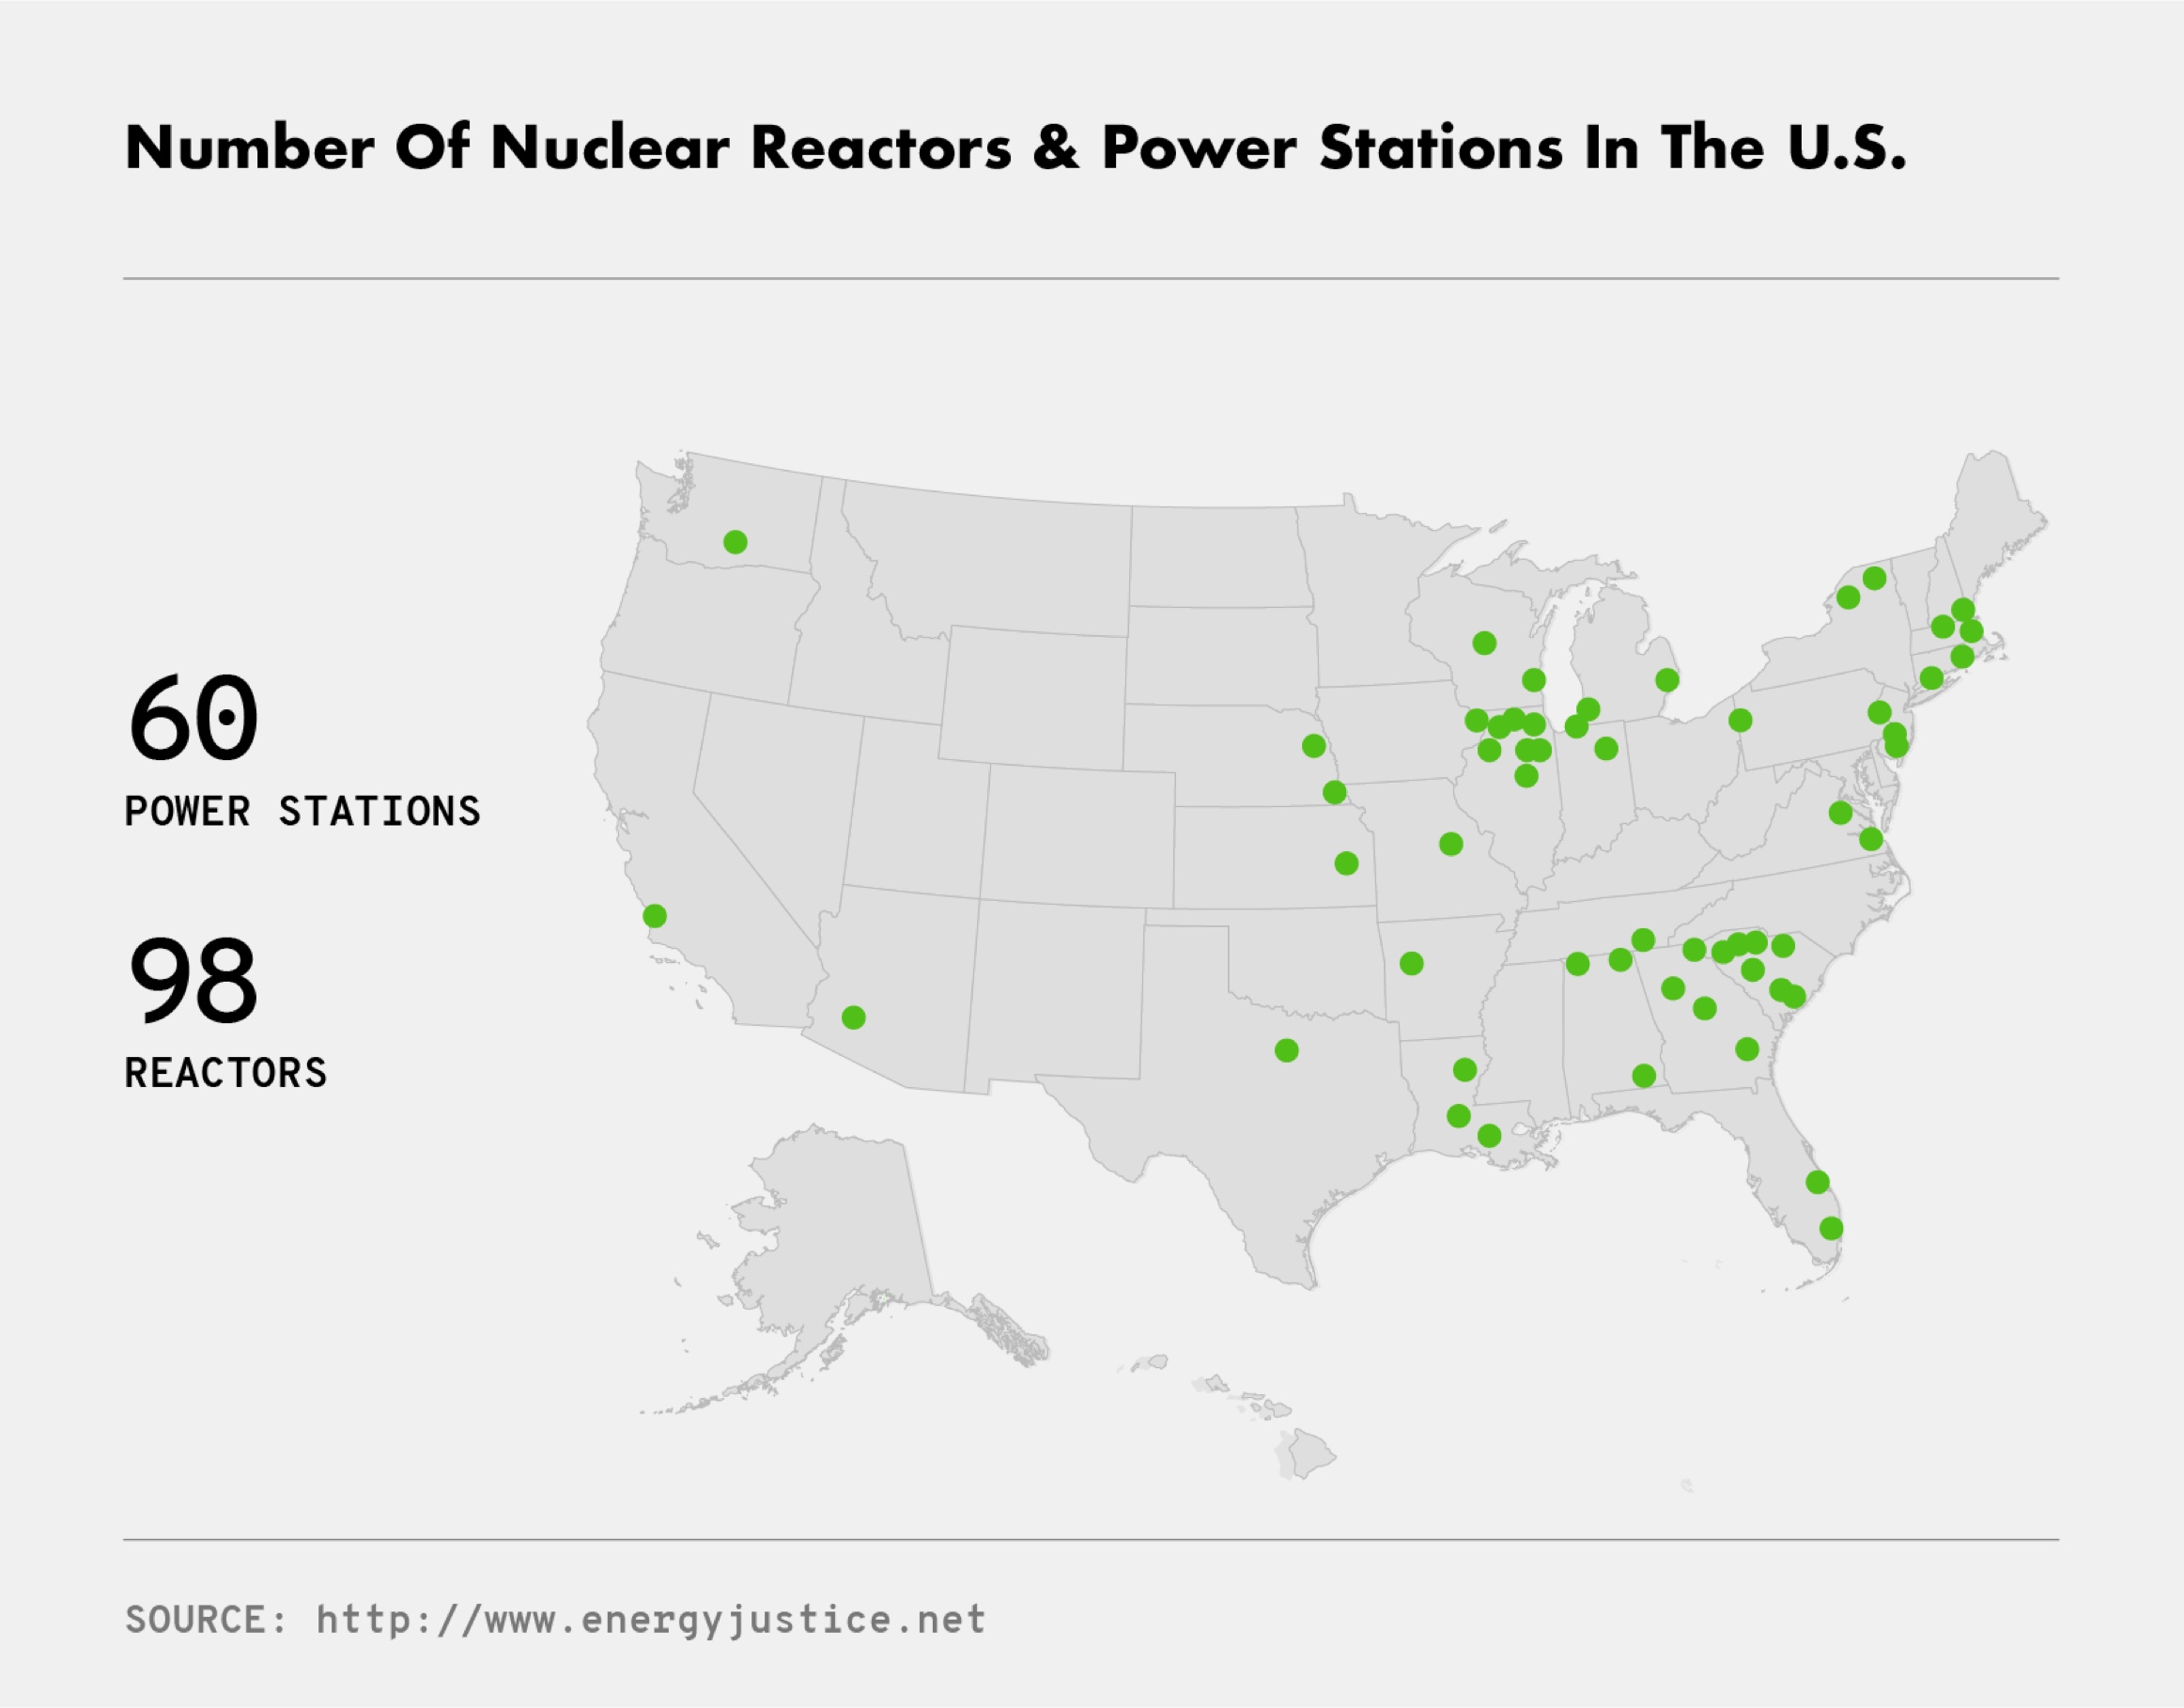 Number of Nuclear Reactors and Power Stations in the U.S.